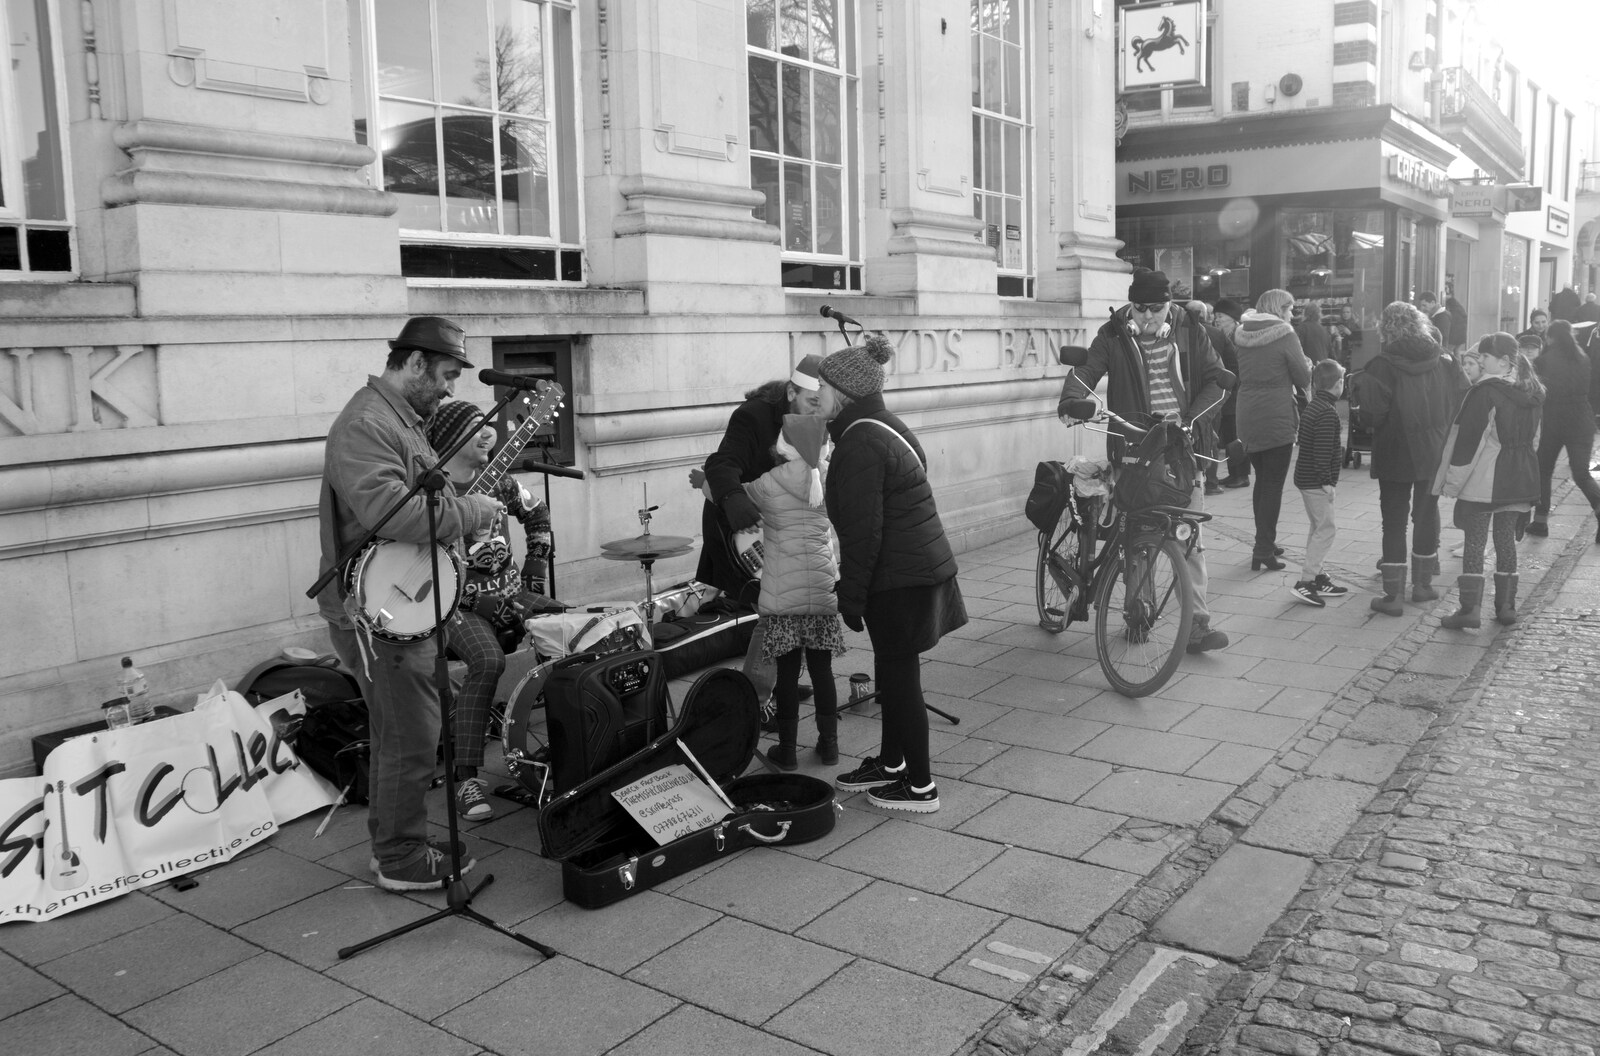 The Misfit Collective 'skifflegrass' band from A Spot of Christmas Shopping, Norwich, Norfolk - 23rd December 2019